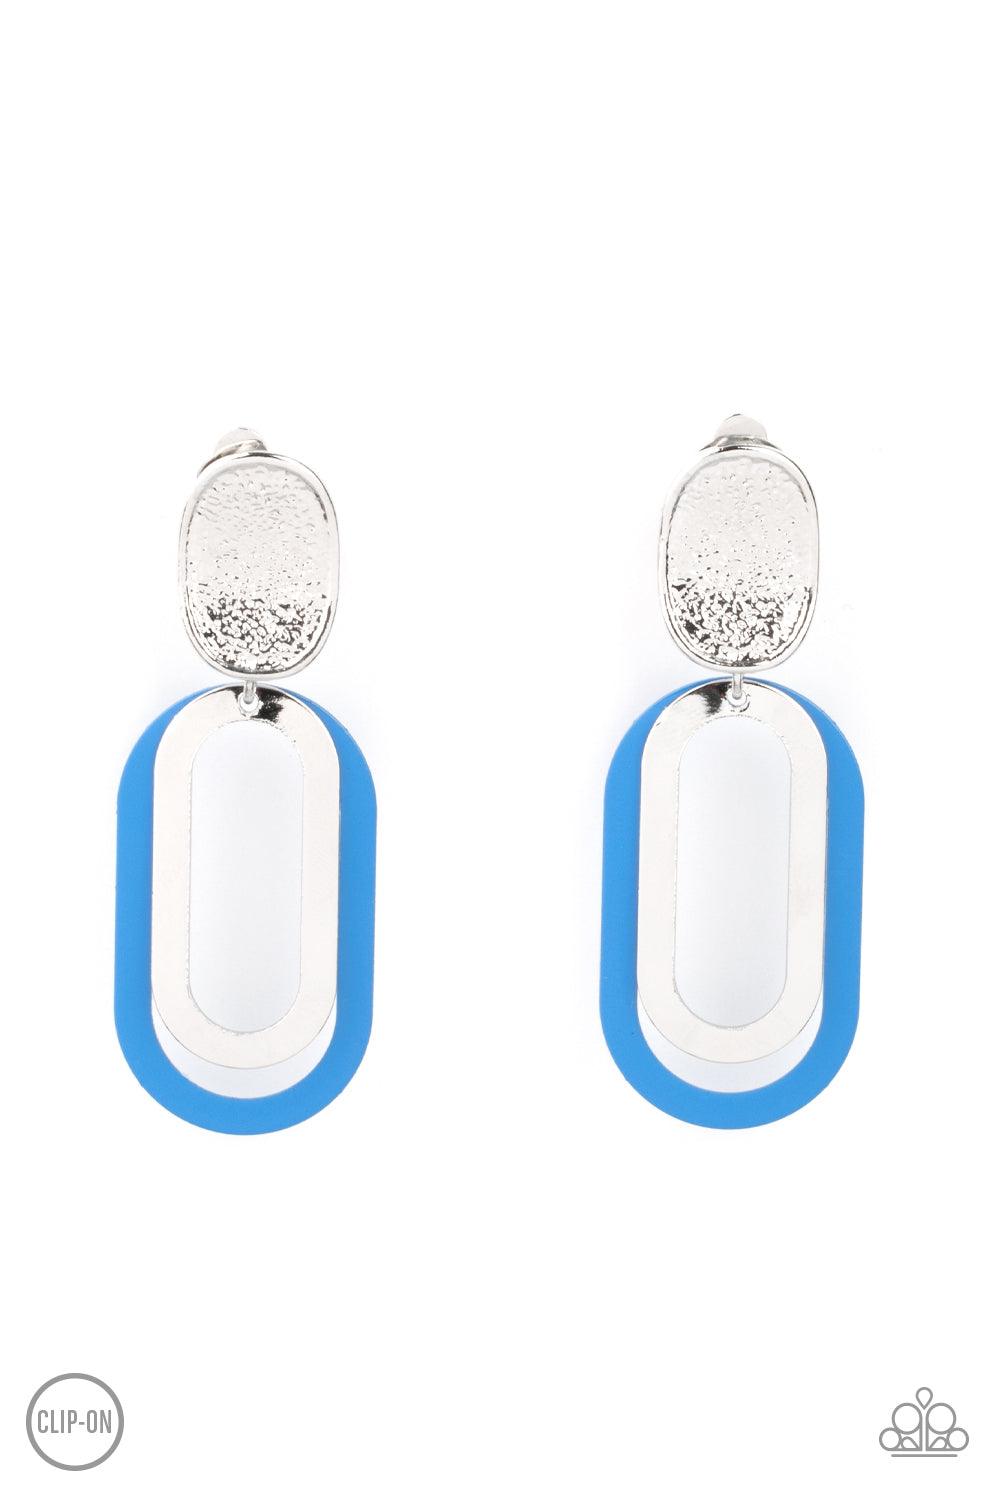 Paparazzi Accessories Melrose Mystery - Blue *Clip-On Shiny silver and French Blue oblong hoops dangle from a shimmery textured silver oval disc for an upscale finale. Earring attaches to a standard clip-on fitting. Sold as one pair of clip-on earrings. J